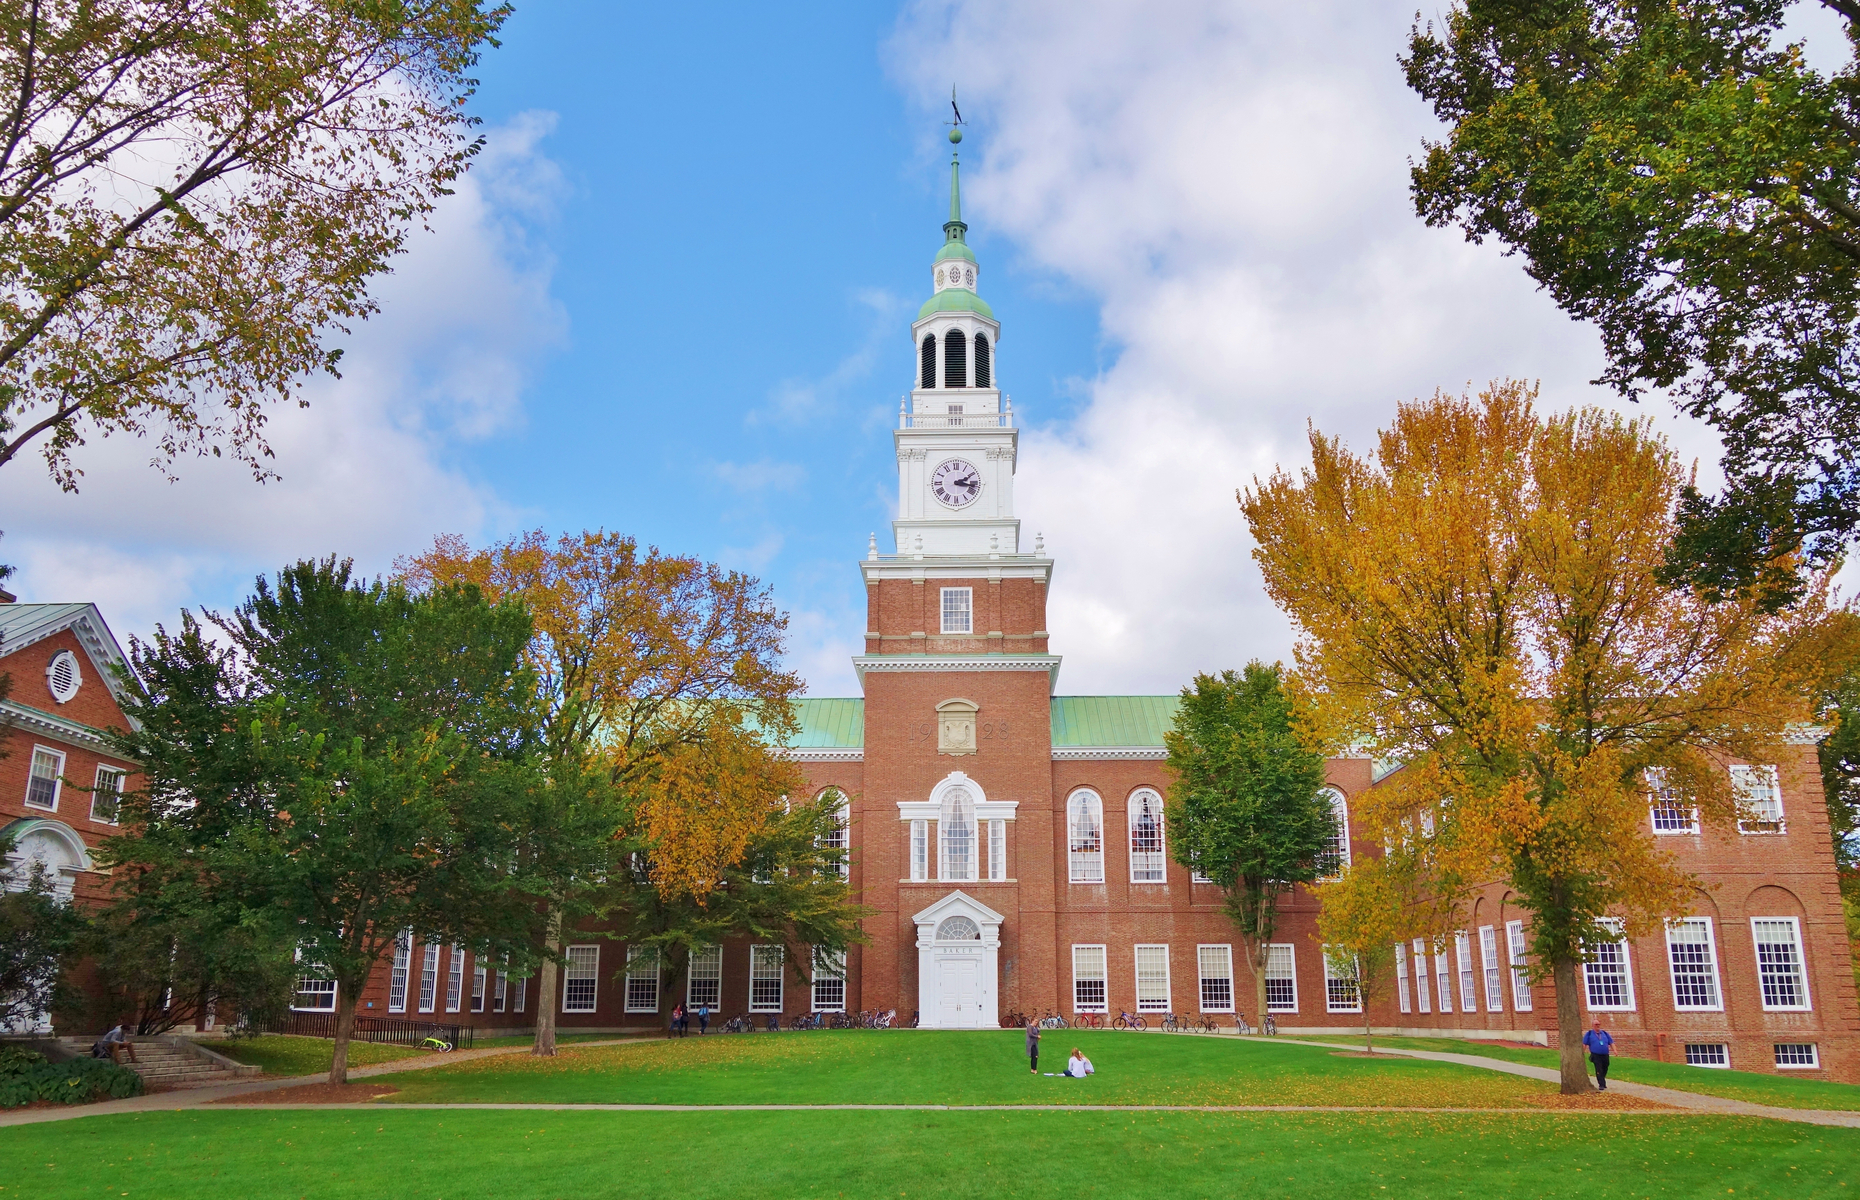 <p>Built along the Connecticut River, <a href="https://admissions.dartmouth.edu/about/our-town-hanover-nh">Hanover</a>is home to the Ivy League school of <a href="https://home.dartmouth.edu/">Dartmouth College</a>. This small college town is the most expensive in the state, with an overall <a href="https://www.homesnacks.com/nh/hanover/#cost-of-living">cost of living</a> of 143, well above the state average of 113.</p>